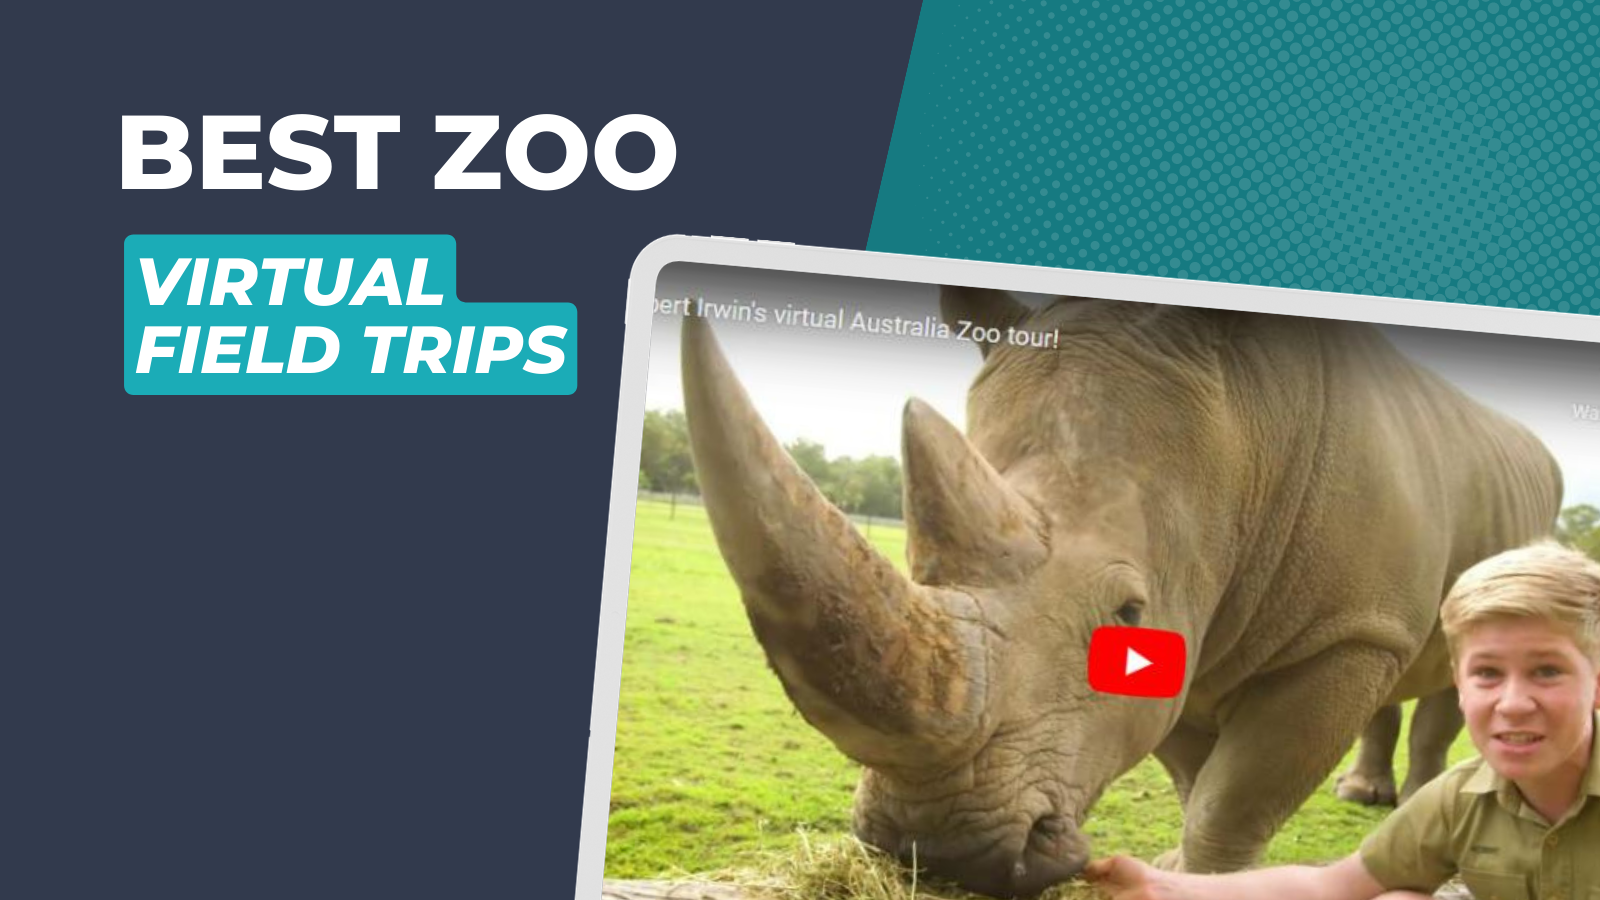 18 Best Virtual Zoo Field Trips, Virtual Zoo Tours, and Zoo Cams